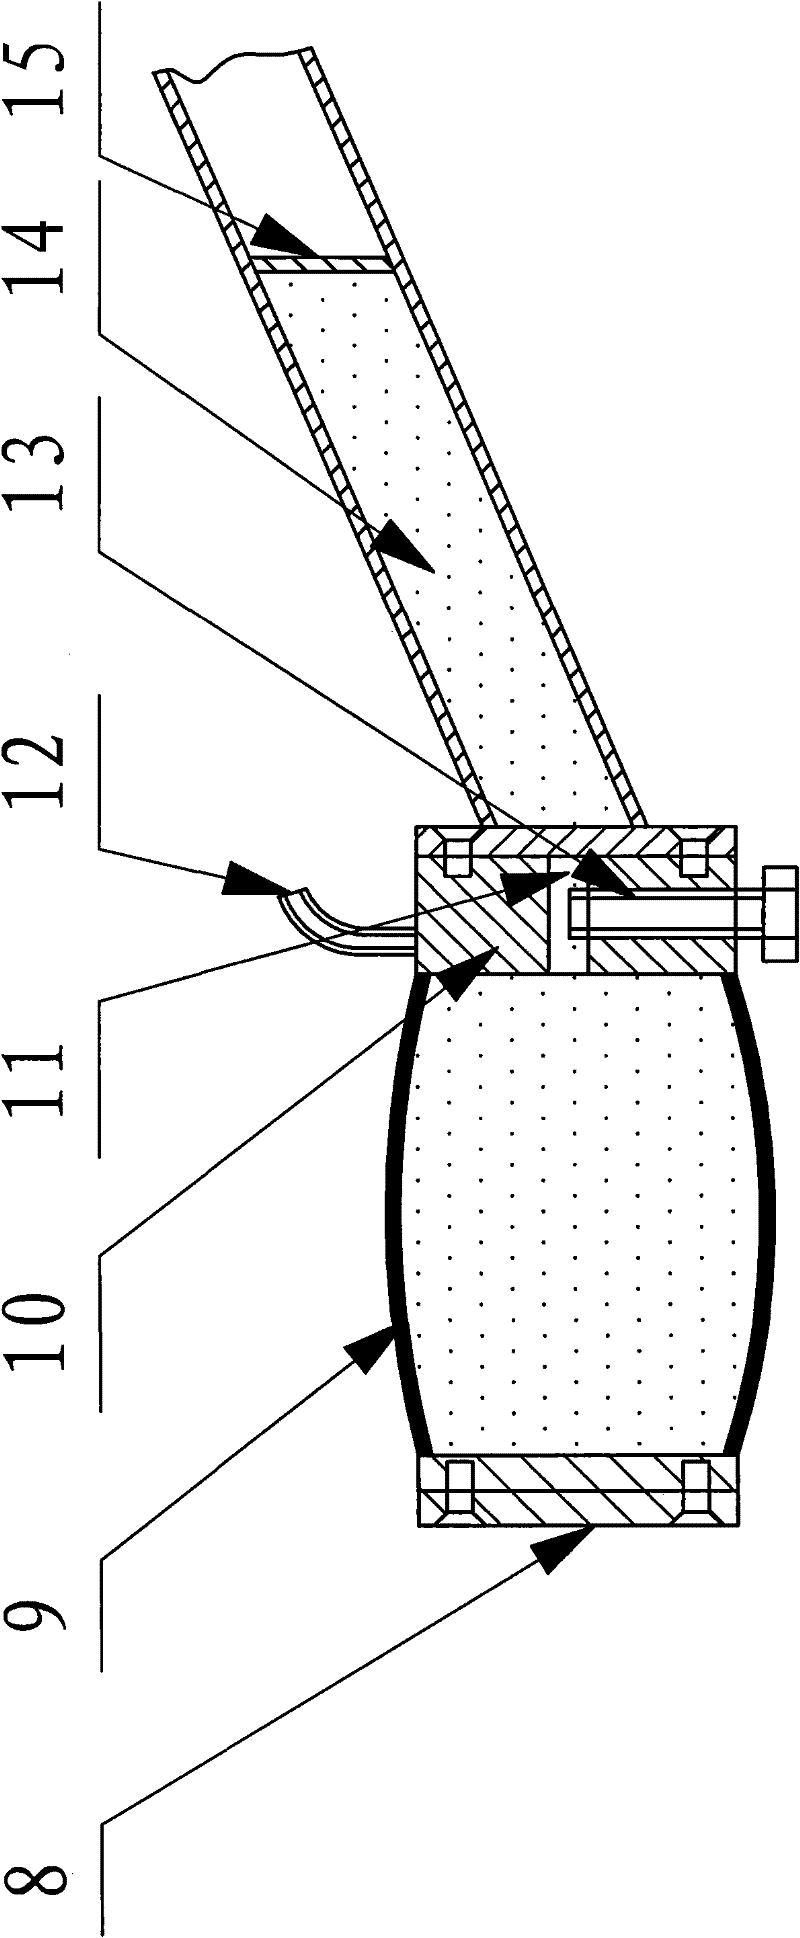 Air spring bicycle vibration damping method with additional air chamber and bicycle